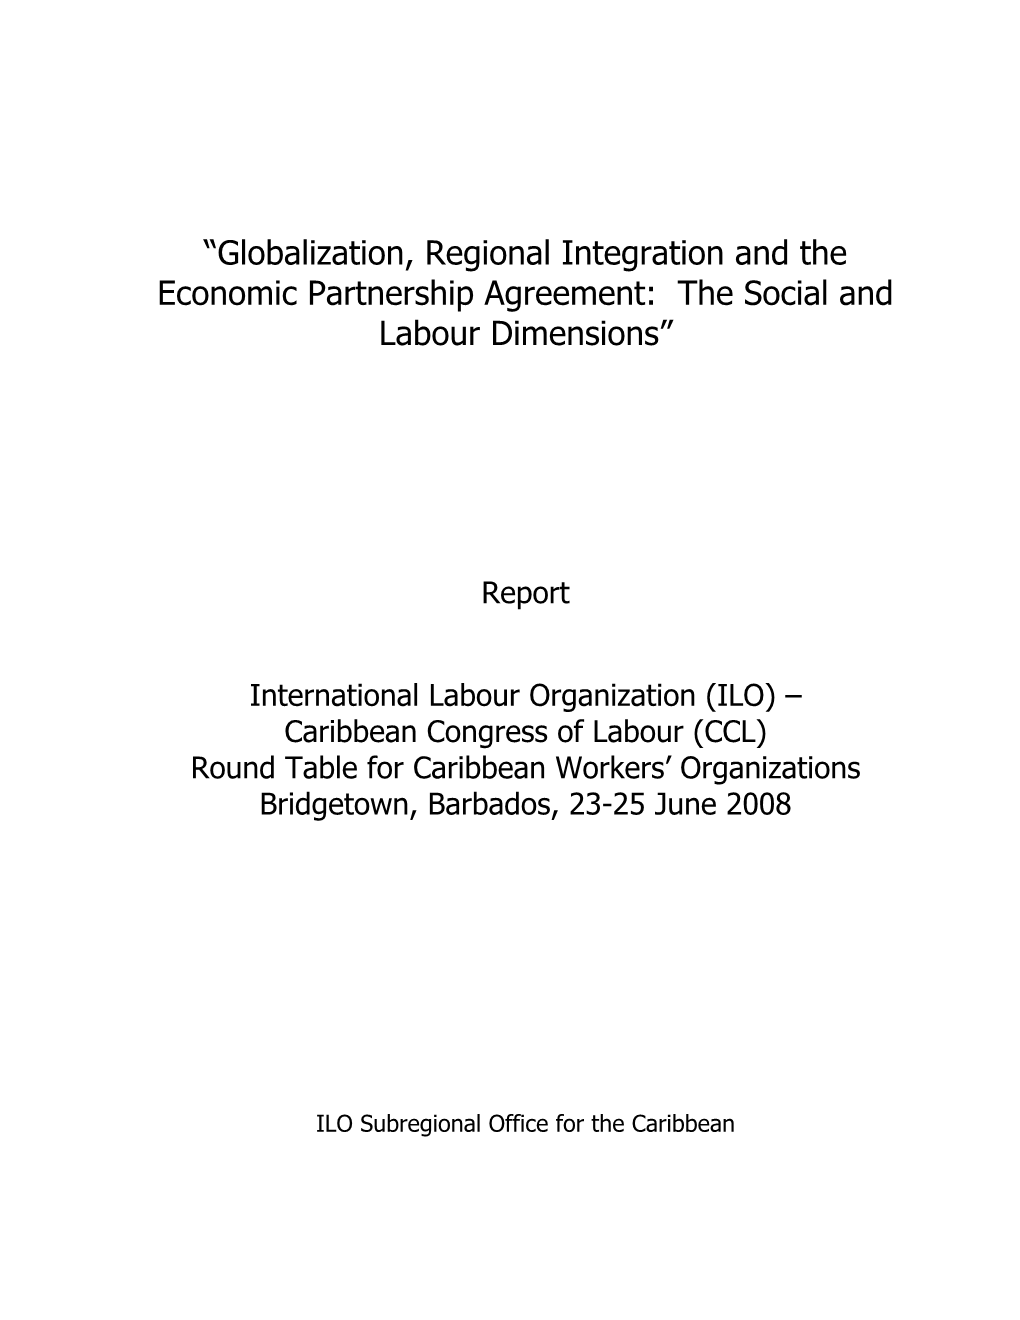 Globalization, Regional Integration and the Economic Partnership Agreement: the Social and Labour Dimensions”